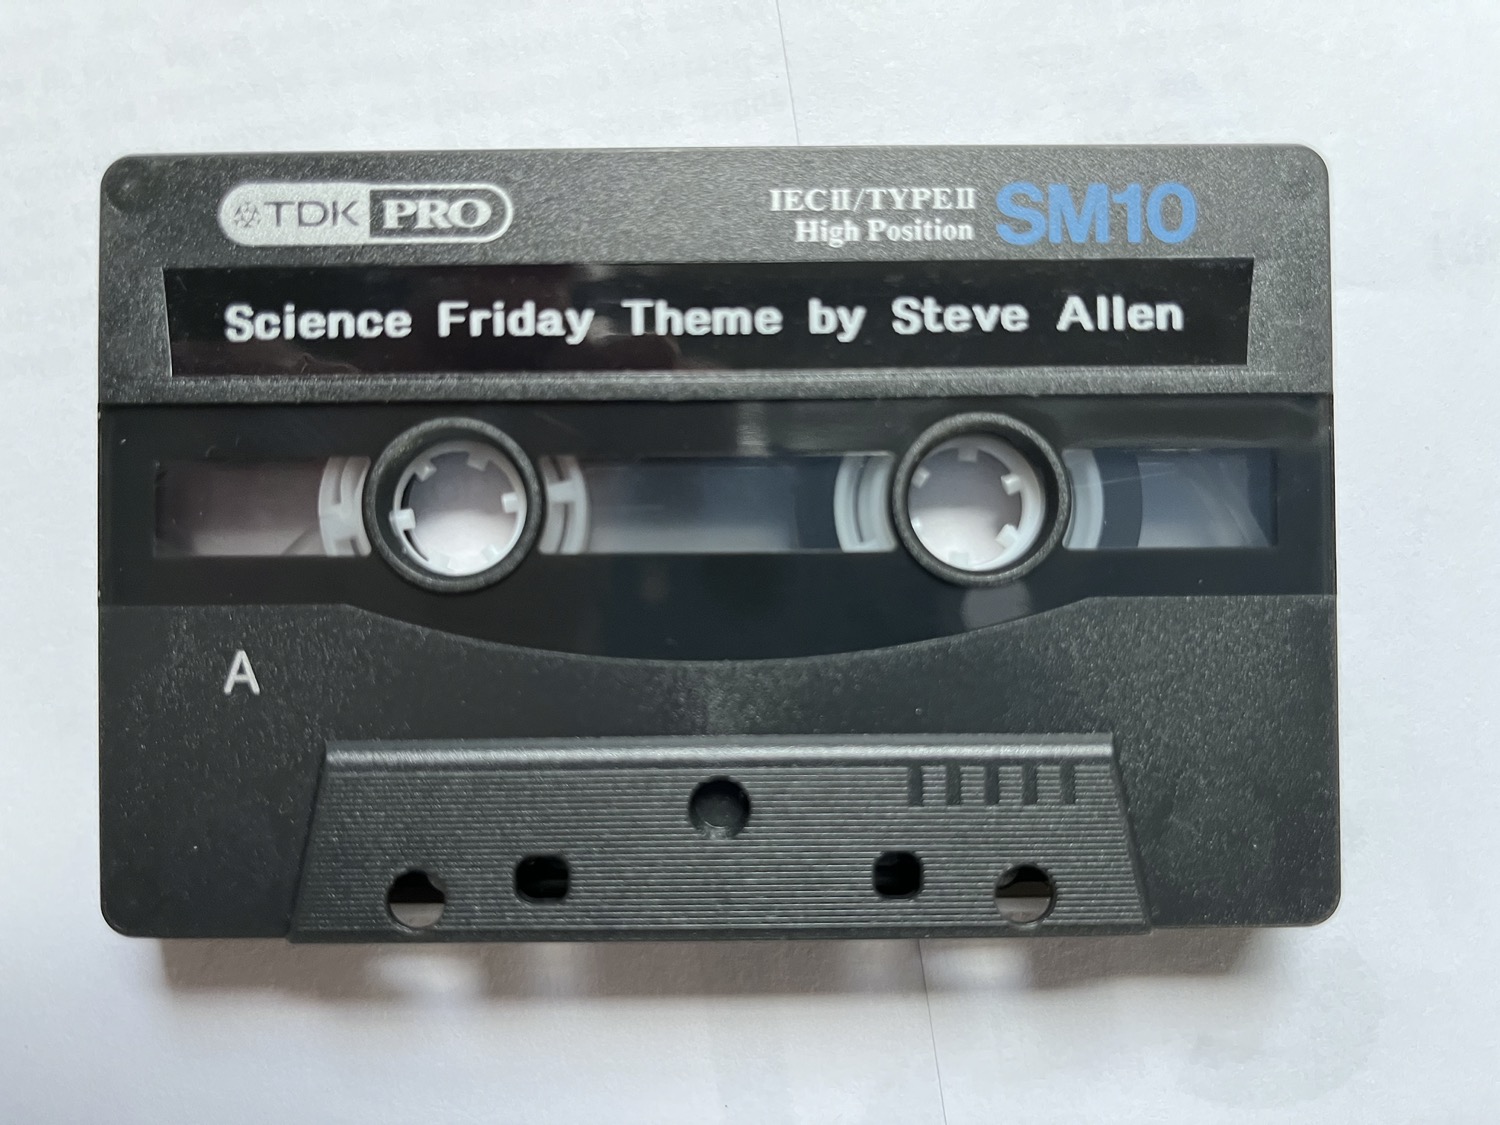 a black tape cassette that says "science friday theme song by steve allen"